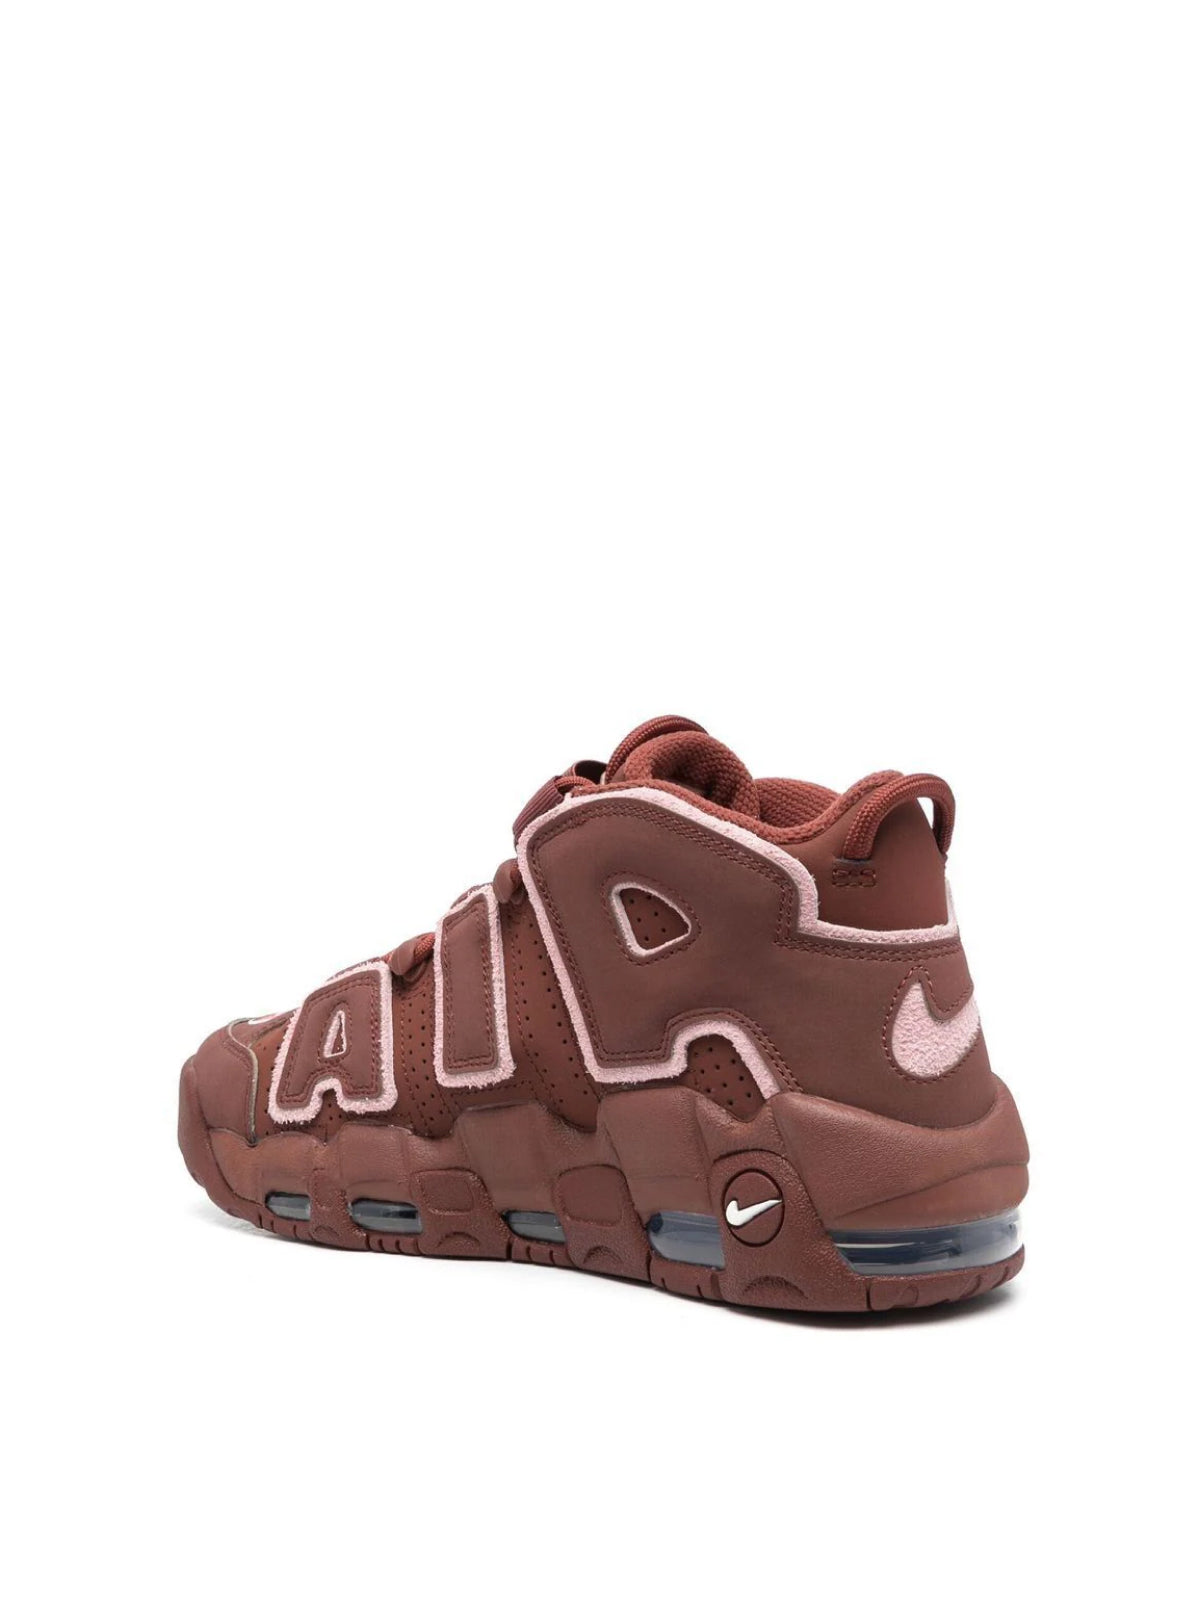 Nike-OUTLET-SALE-Air More Uptempo '96 Sneakers-ARCHIVIST